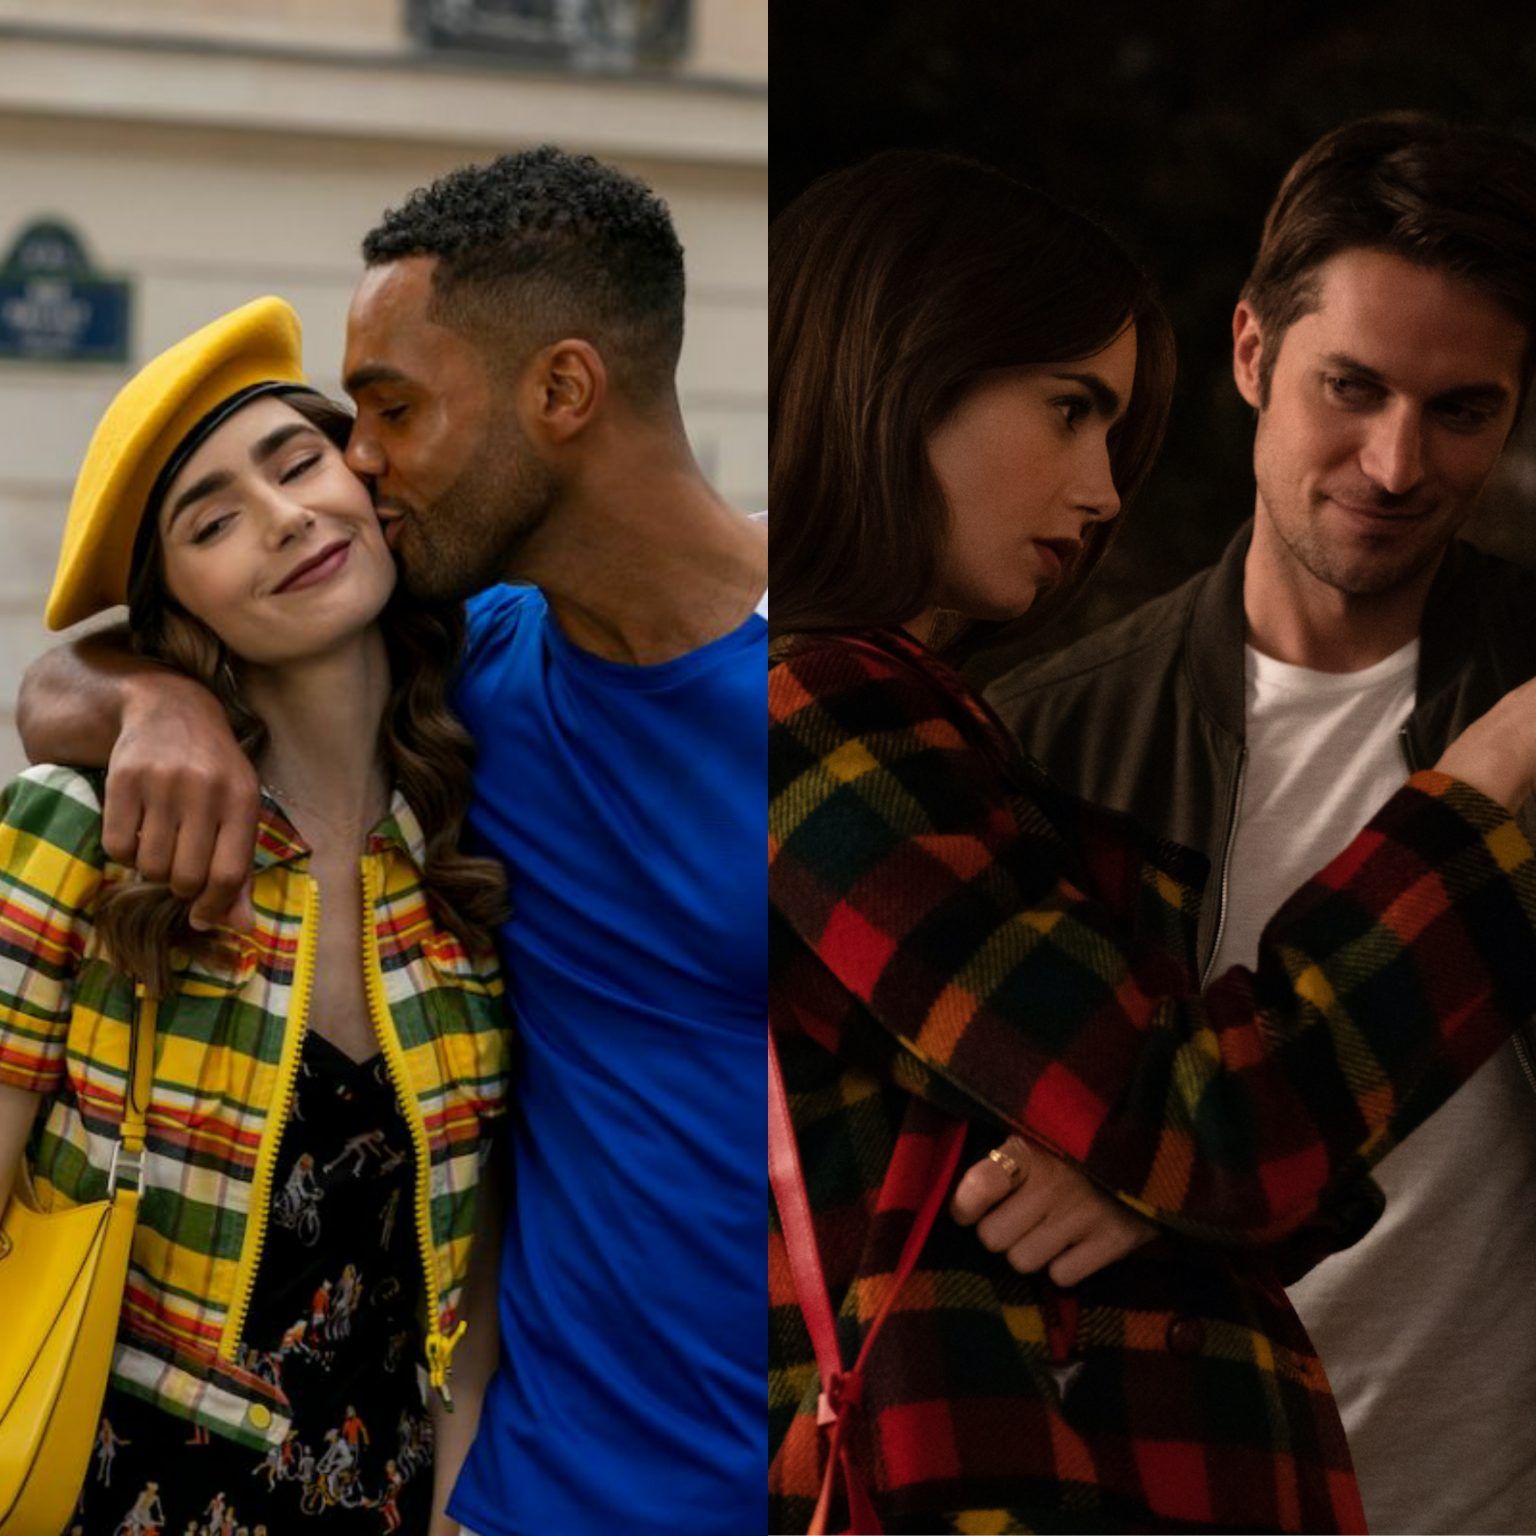 Let 'Emily In Paris' Be Your Valentine's Guide